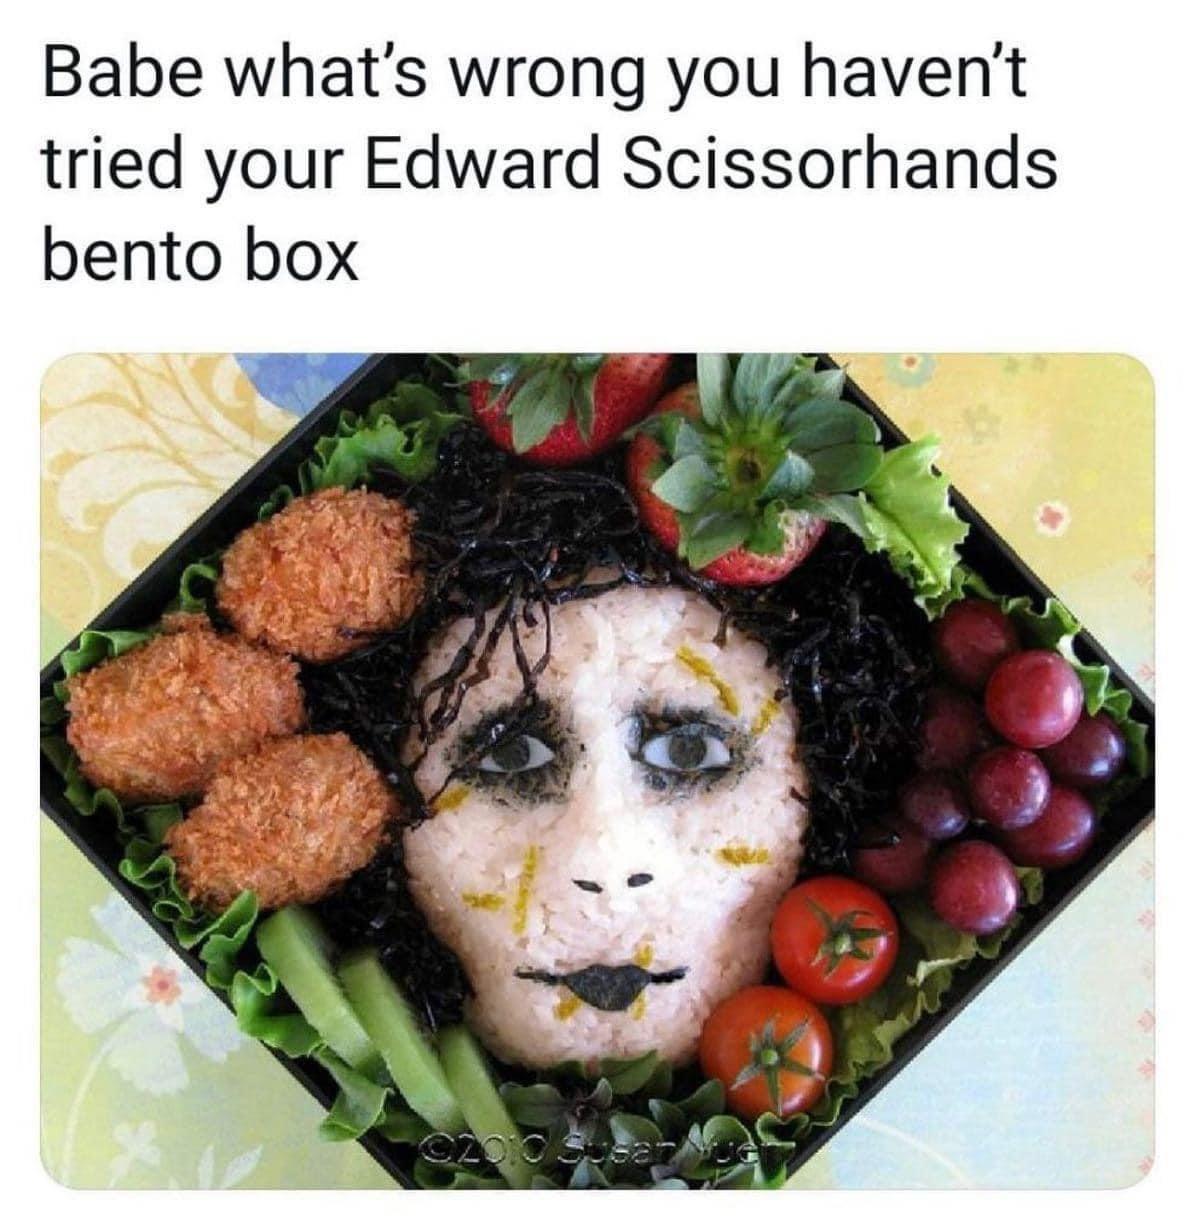 funny memes - edward scissorhands bento box - Babe what's wrong you haven't tried your Edward Scissorhands bento box C2010 Susan